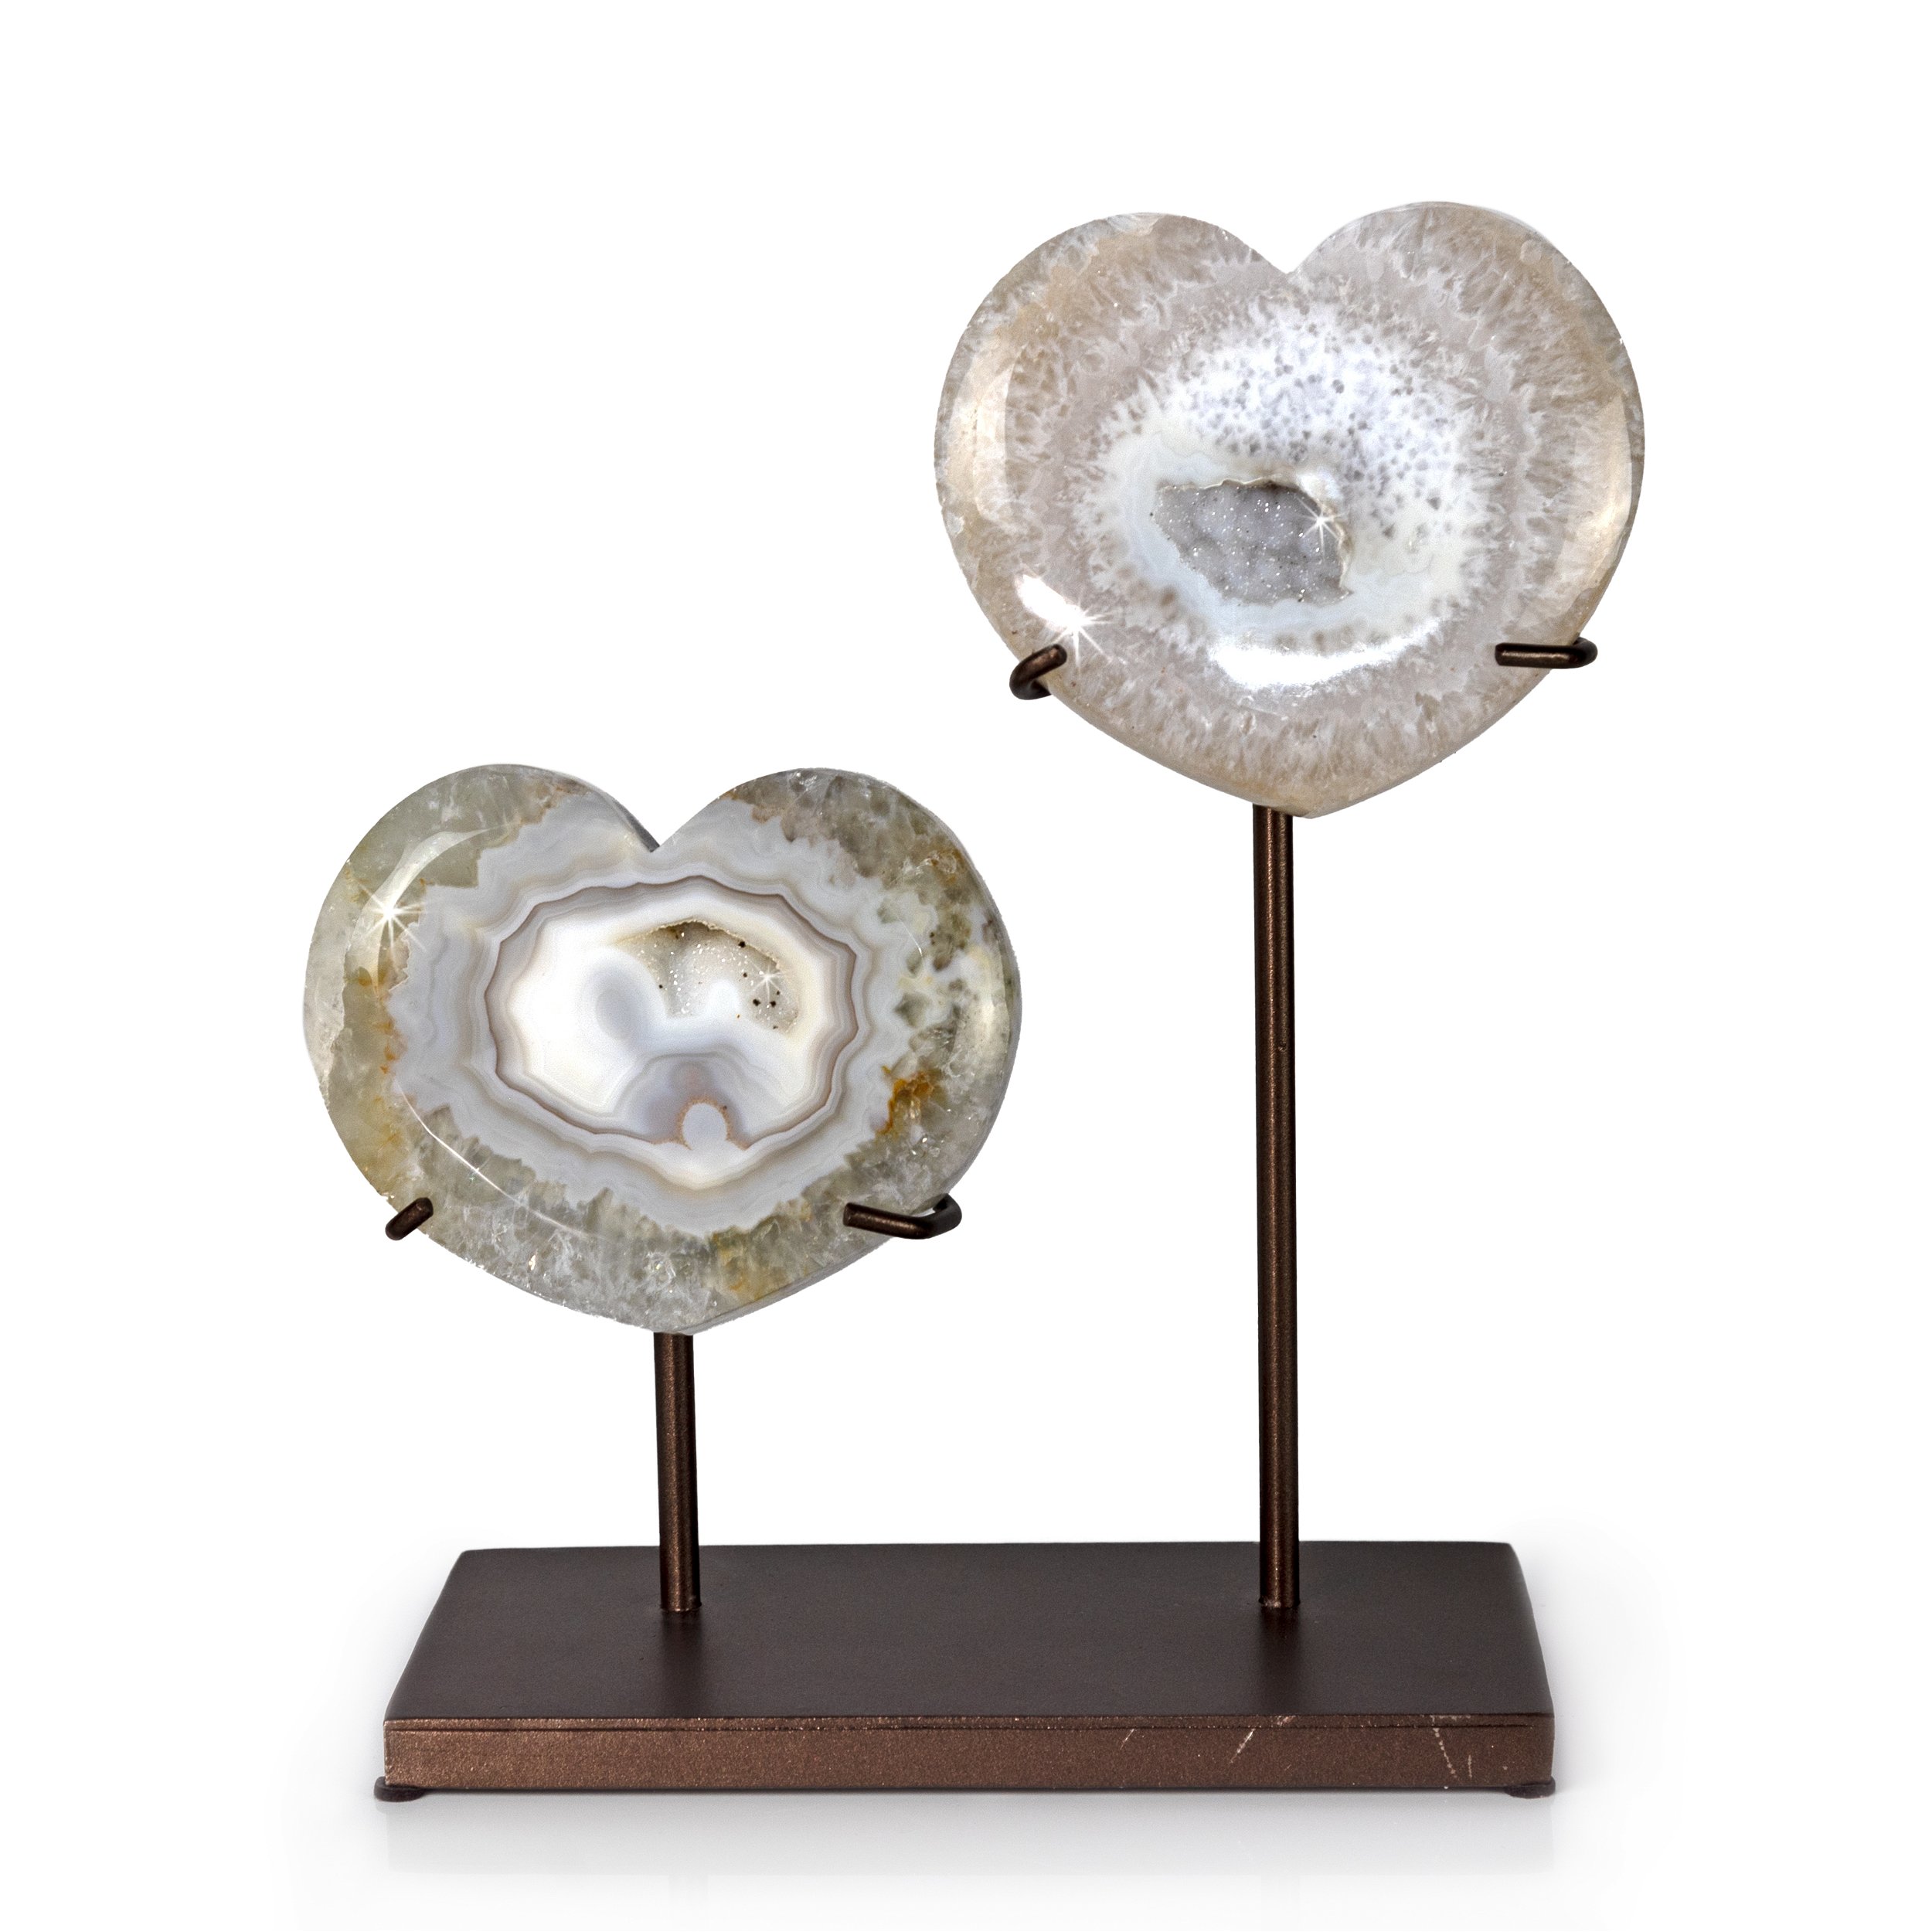 Druze Quartz Agate Heart Duo On Fitted Stand